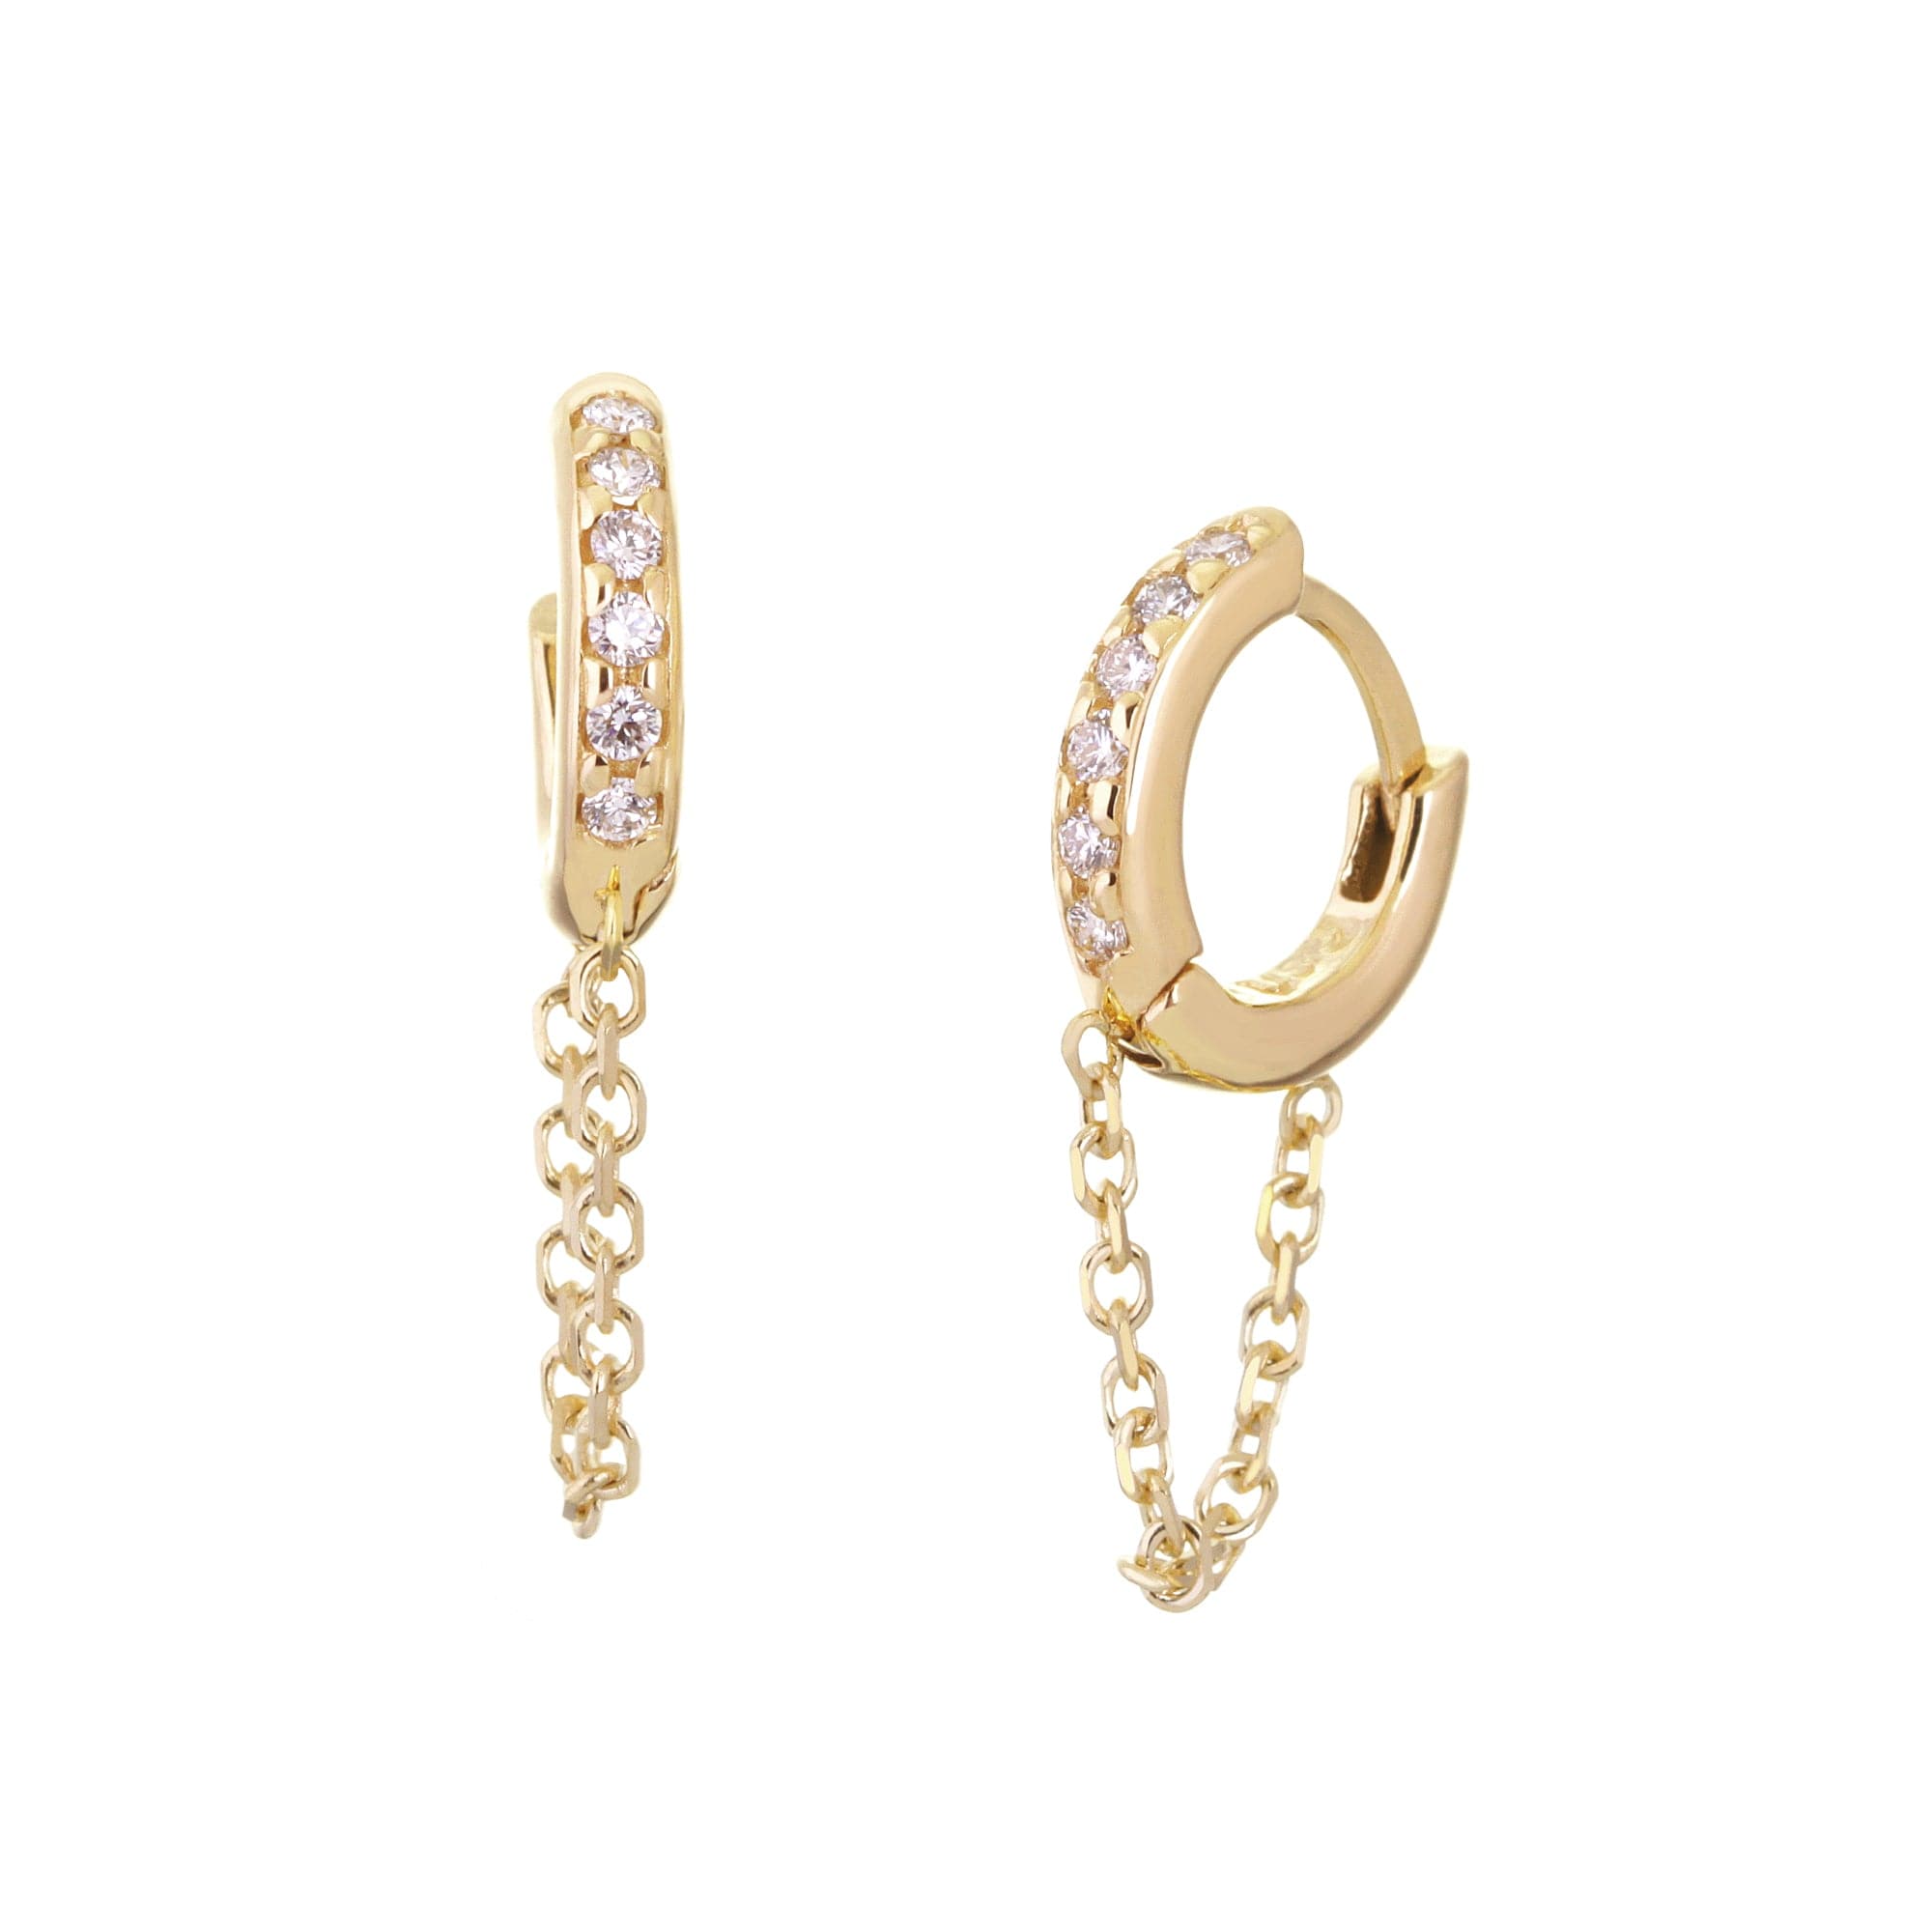 12.5mm Diamond And 14k Gold Huggies With Chain